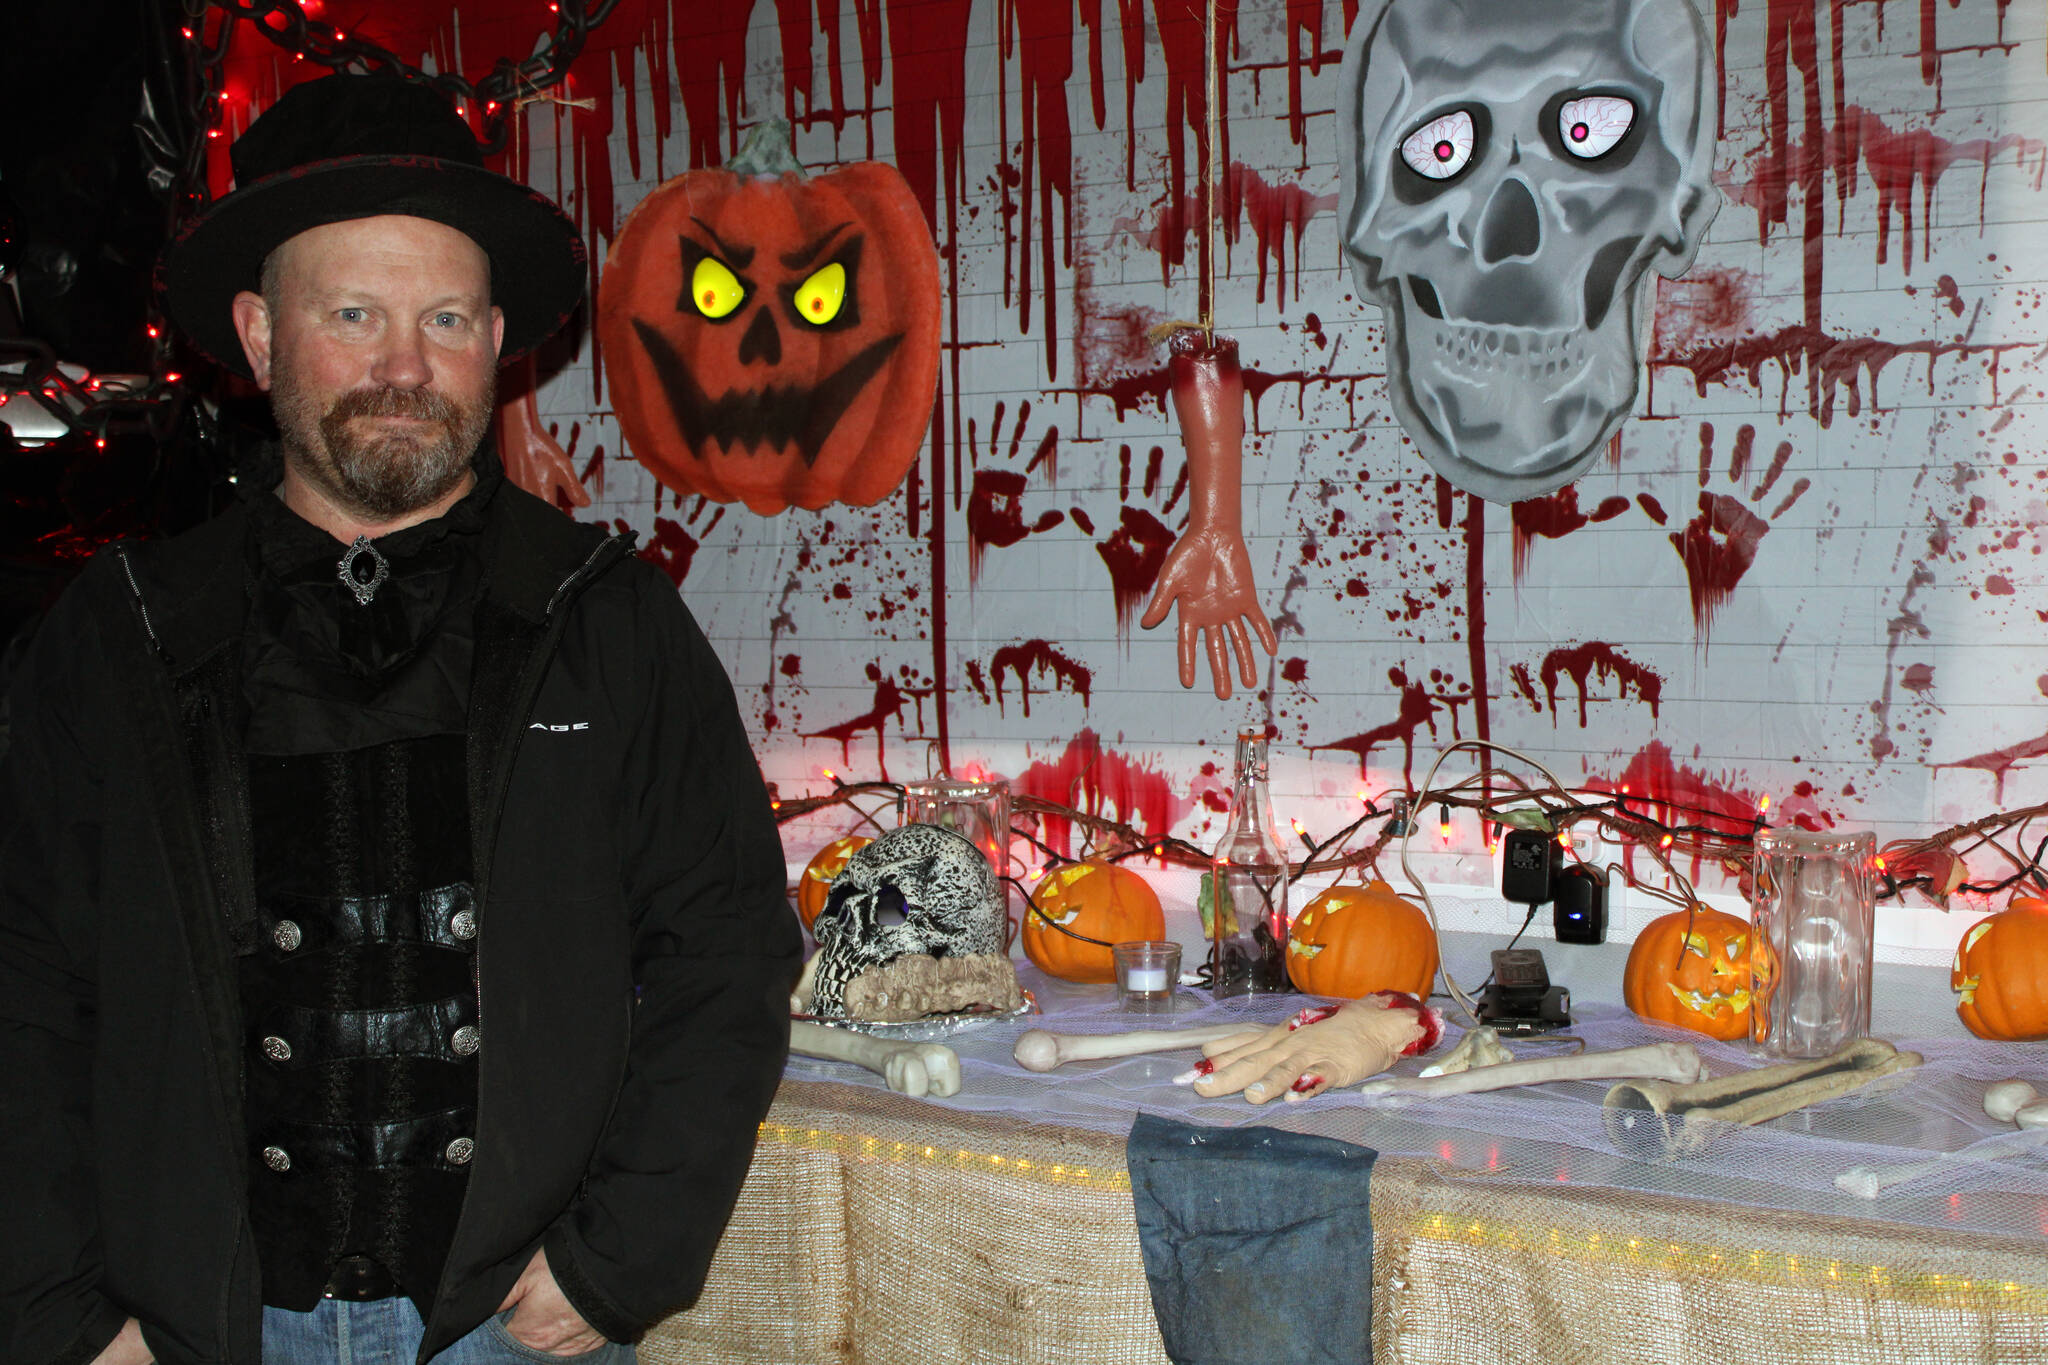 Dan Earls shows off some of the scenes on display at Earls’ Haunted Garage. On Oct. 28, he was adding finishing touches to his display in anticipation of thrill-seekers who will stop by for a scare over Halloween weekend. His haunted garage resulted in 1,563 pounds of donated food headed to local food banks. (Dana Zigmund/Juneau Empire)